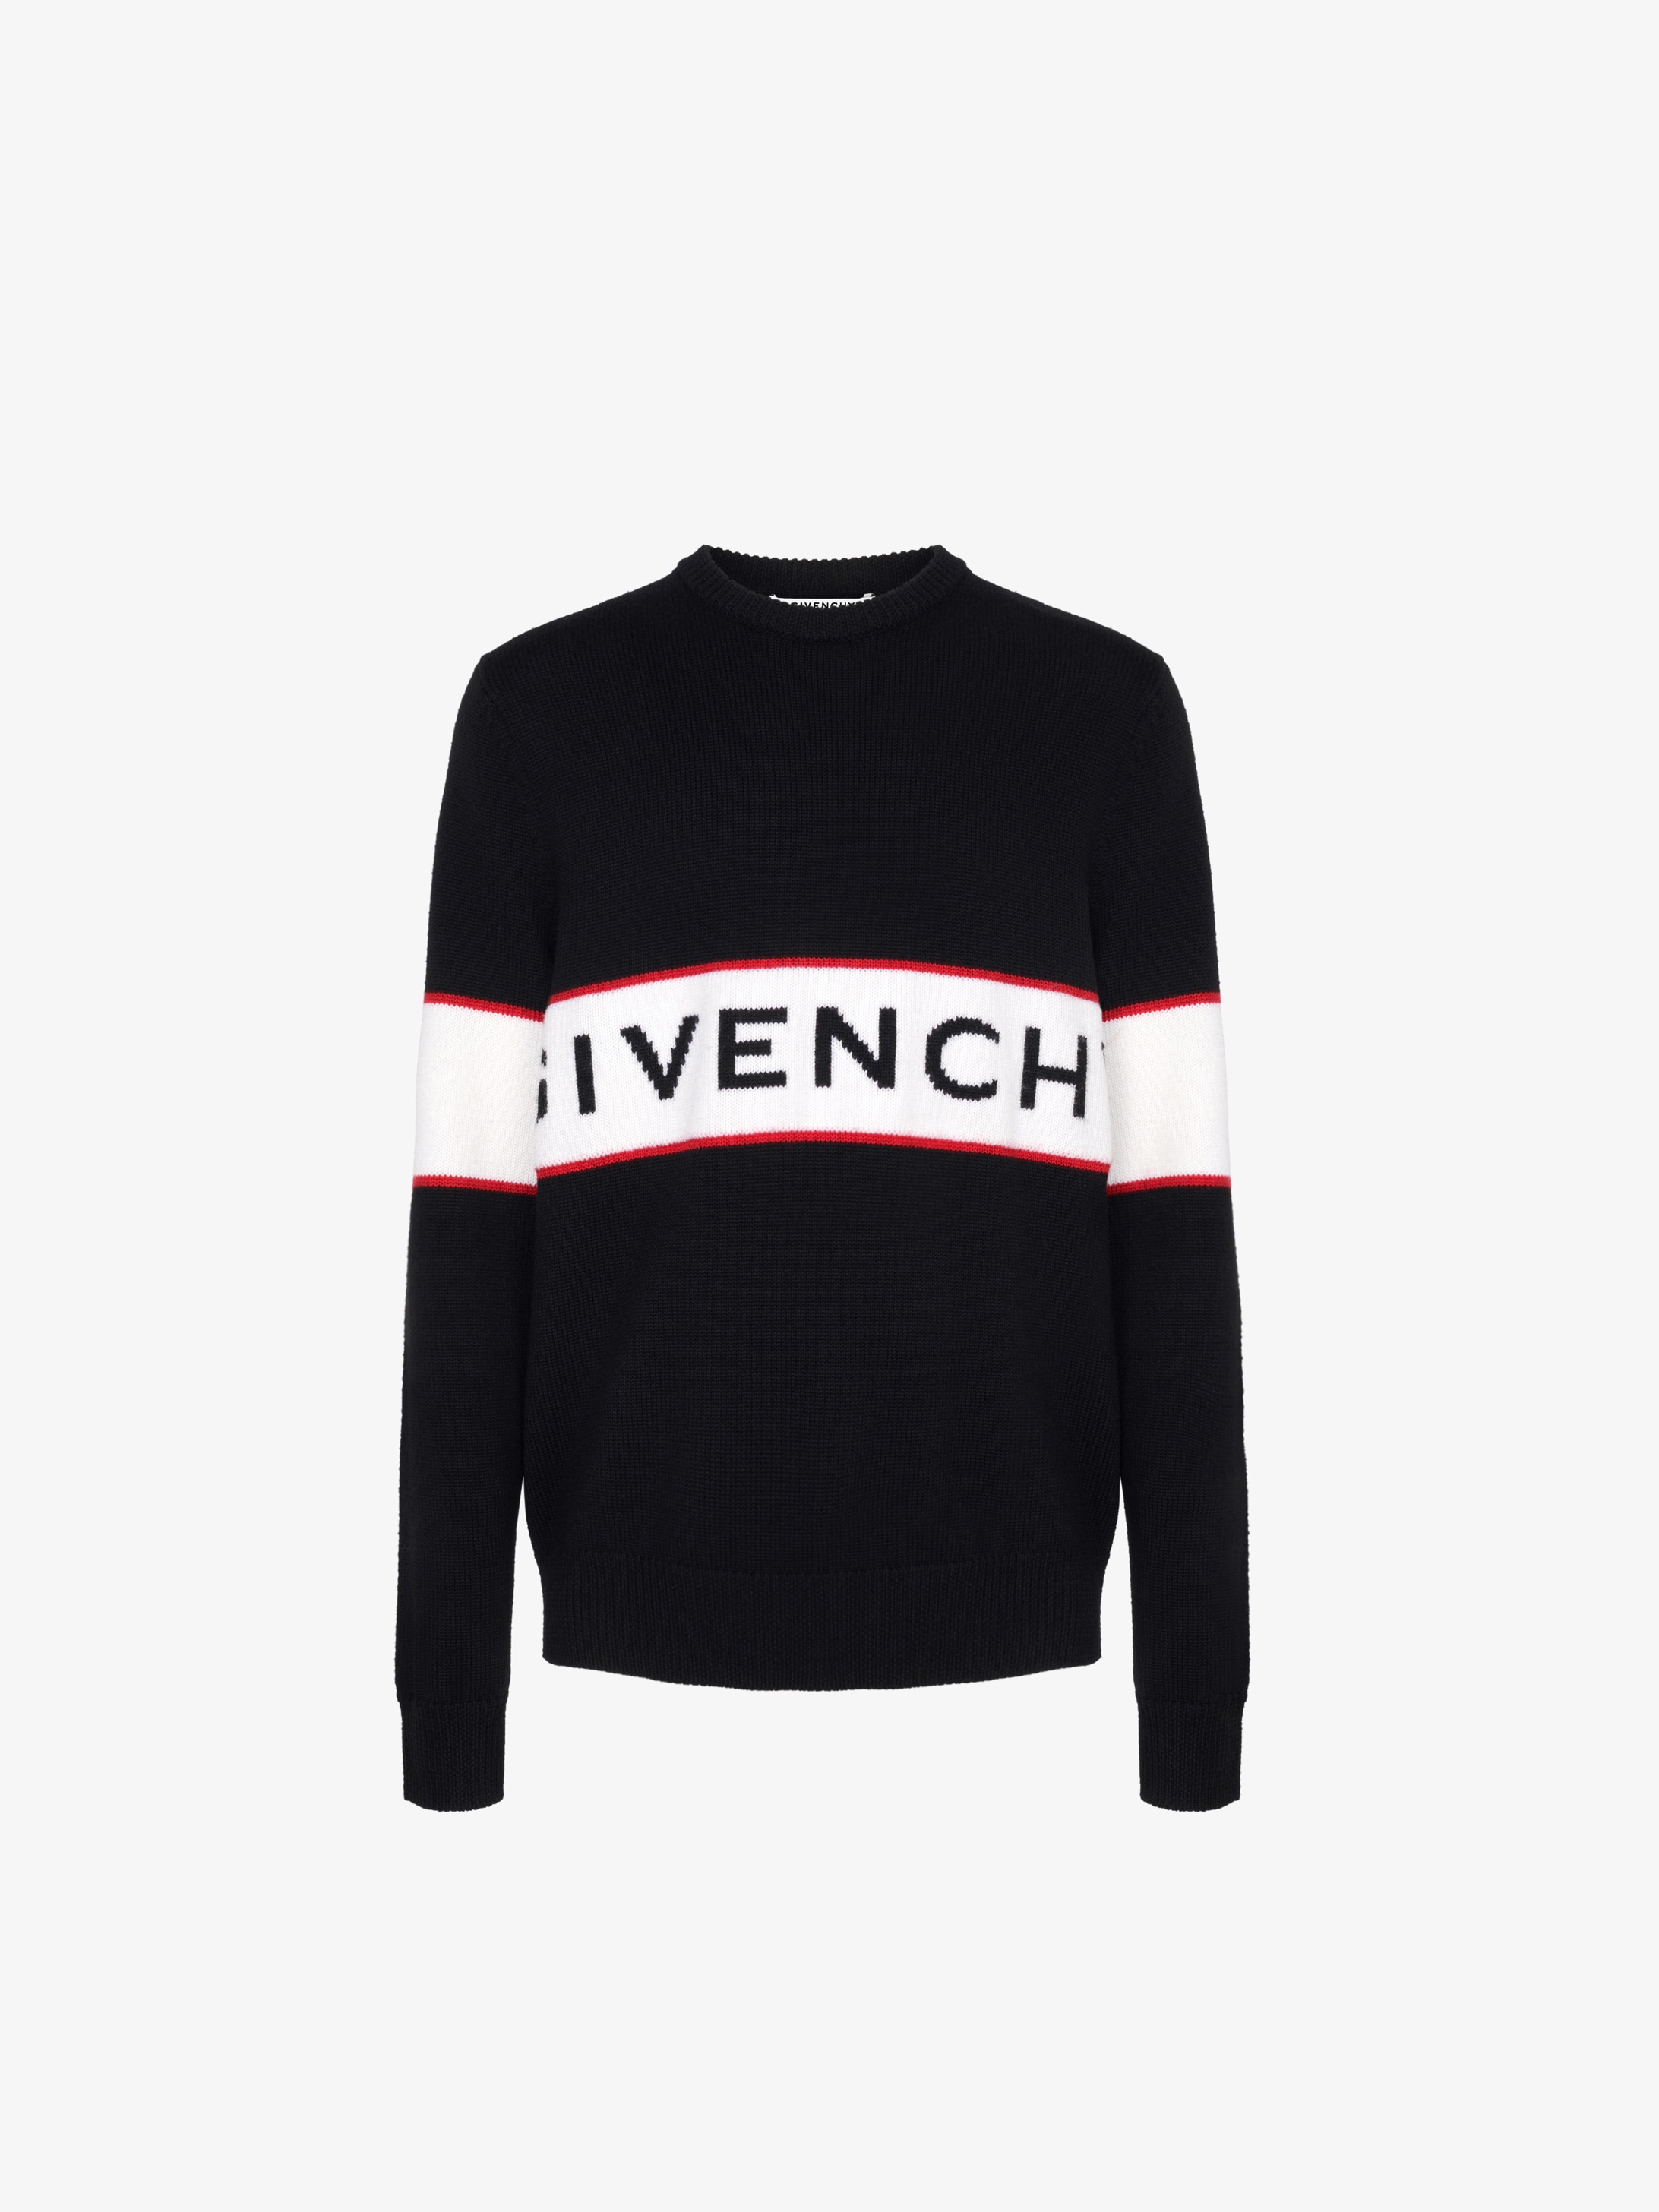 GIVENCHY contrasted band jumper 